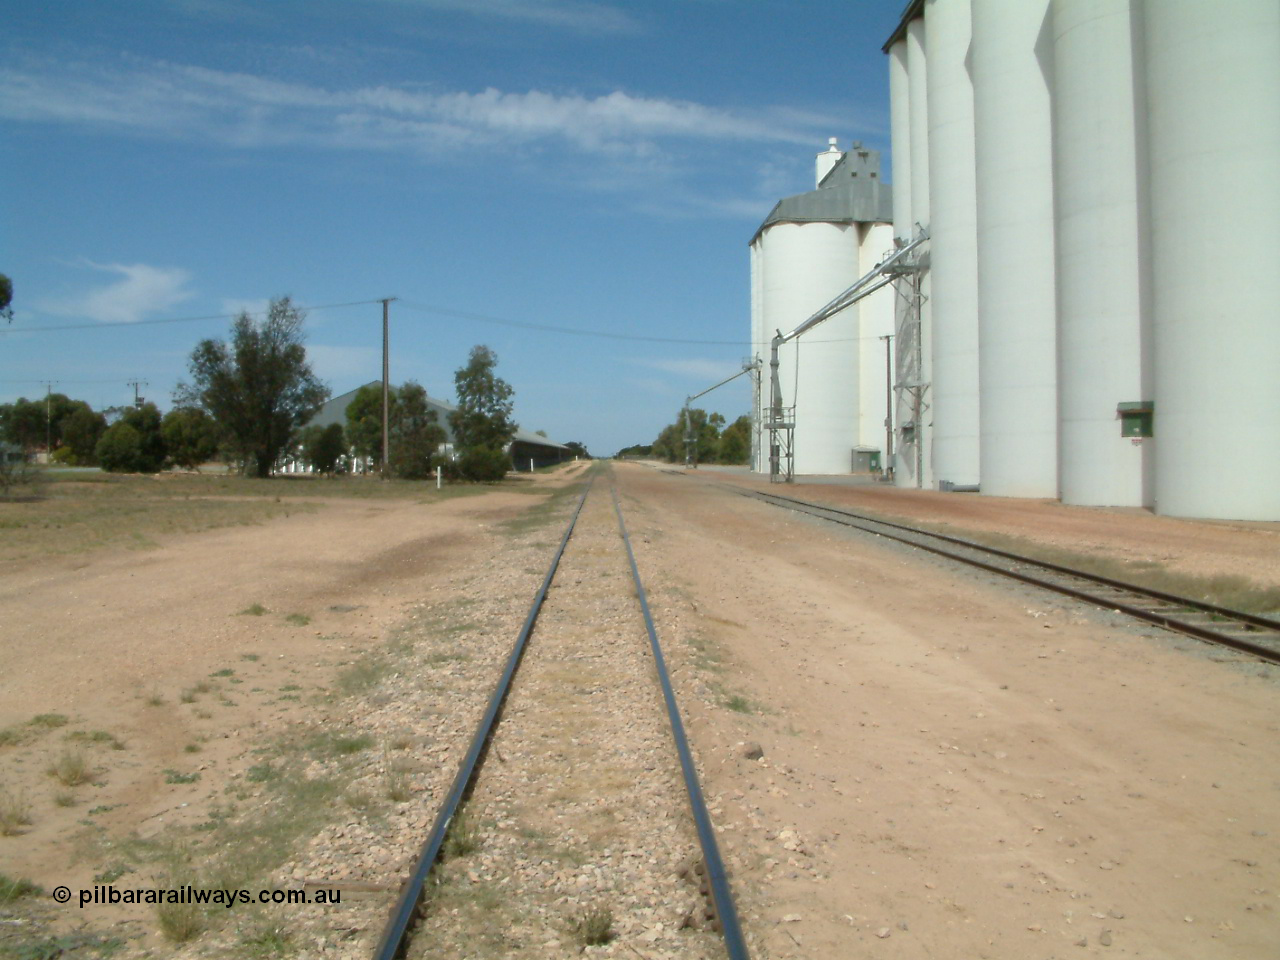 030405 133308
Wudinna, yard view looking along the mainline south with grain shed on the left and silo complexes and loading spouts on the right, old station site on the left, 5th April 2003.
